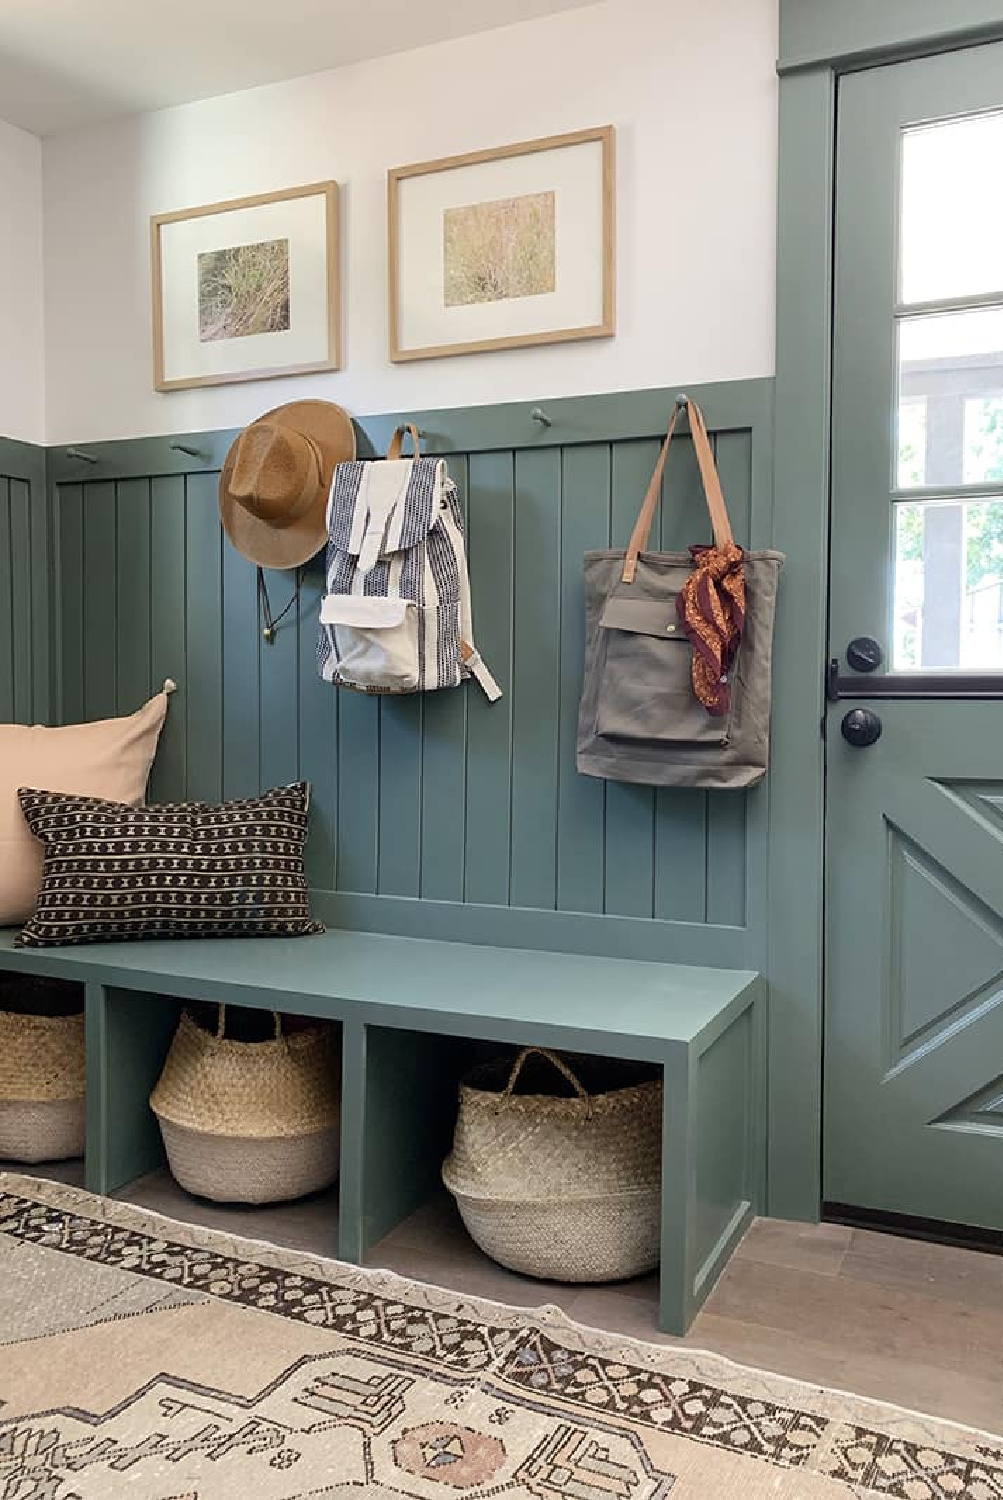 Rustic paneled sage green mud room with bench. AI Design via Whitney Hess (Just Decorate!). #aidesign #aiinteriordesign #aiarchitecture #mudroom